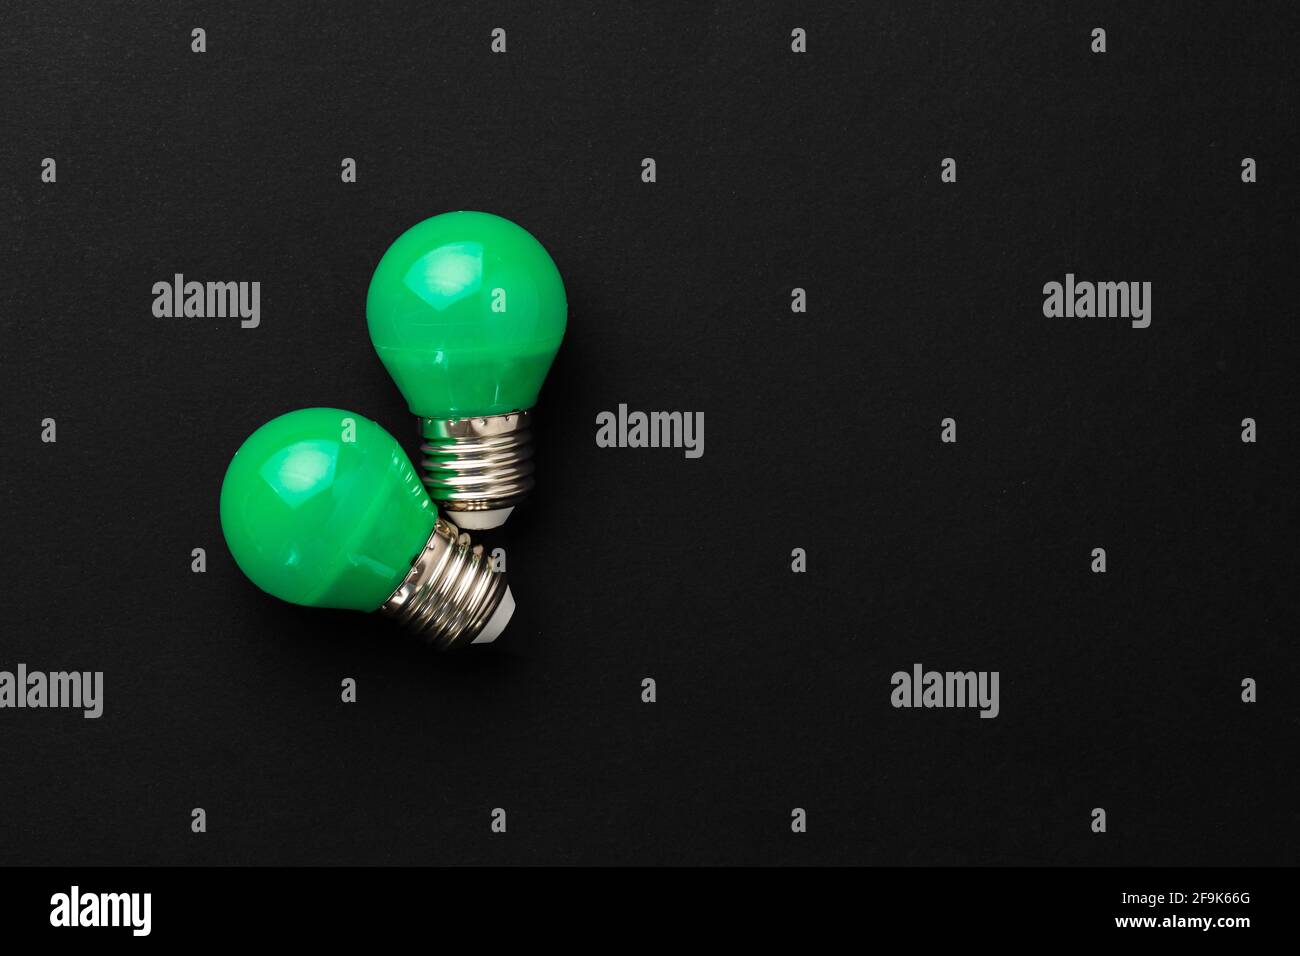 Two green light bulbs on black background Stock Photo